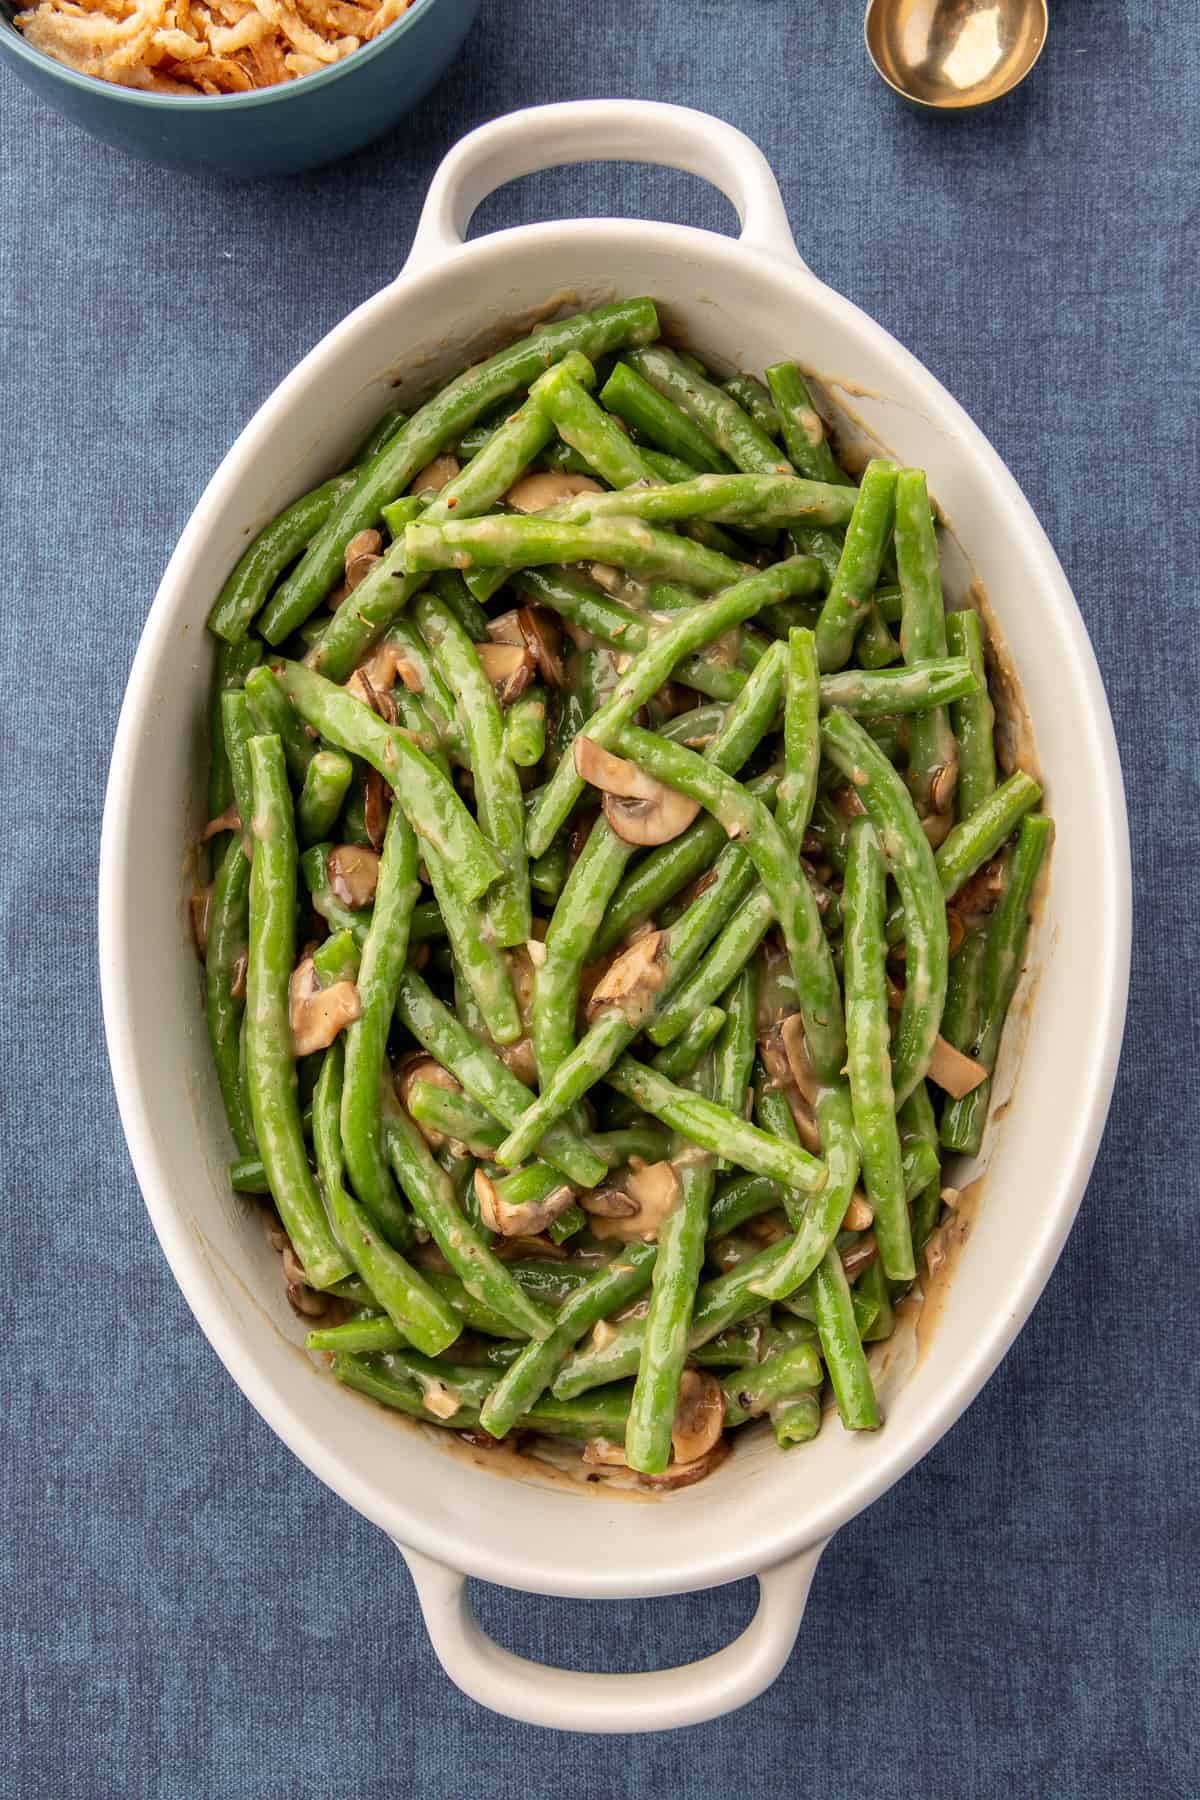 Homemade Green Bean Casserole in oval baking dish without the crispy onions.